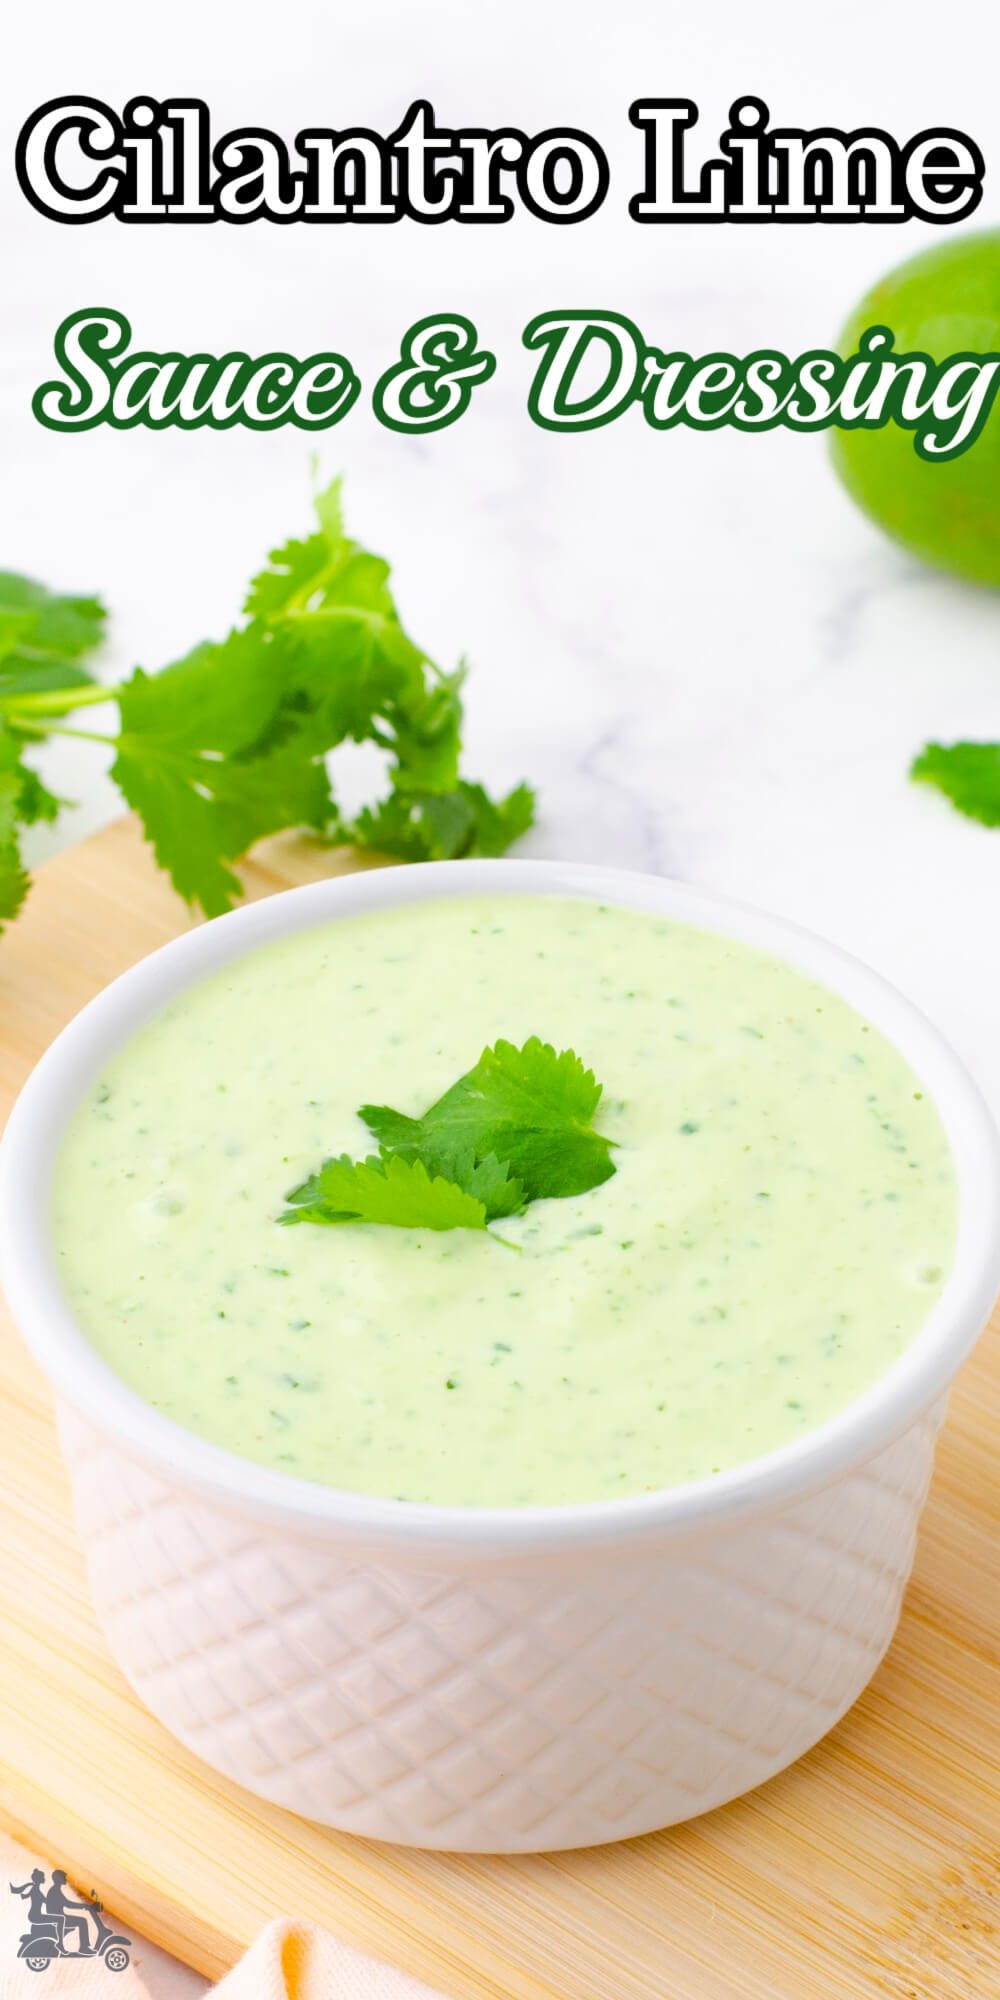 This creamy Cilantro Lime Sauce recipe is the dipping and dressing sauce of your dreams. It's loaded up with fresh garlic, zingy cilantro, tart lime, and spicy jalapeño peppers. Think of ranch dressing only better. Once you try it you'll want to drizzle it on your tacos, nachos, burritos, salads, everything you can think of. You can personalize this sauce/dressing by making it spicier, vegan, lower in calories, and even swap out the cilantro if you don't care for it.